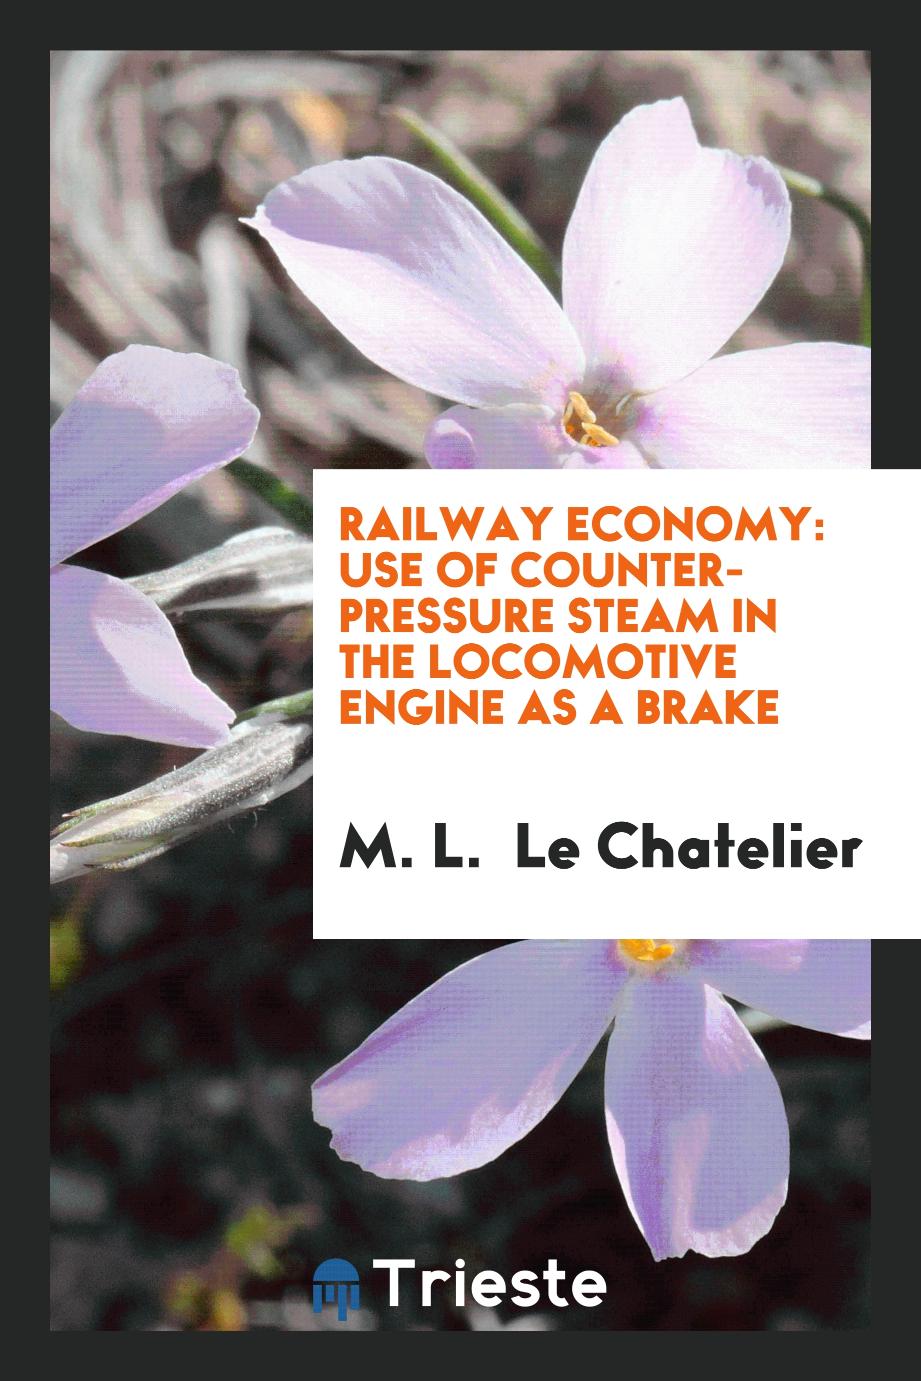 Railway Economy: Use of Counter-pressure Steam in the Locomotive Engine as a Brake